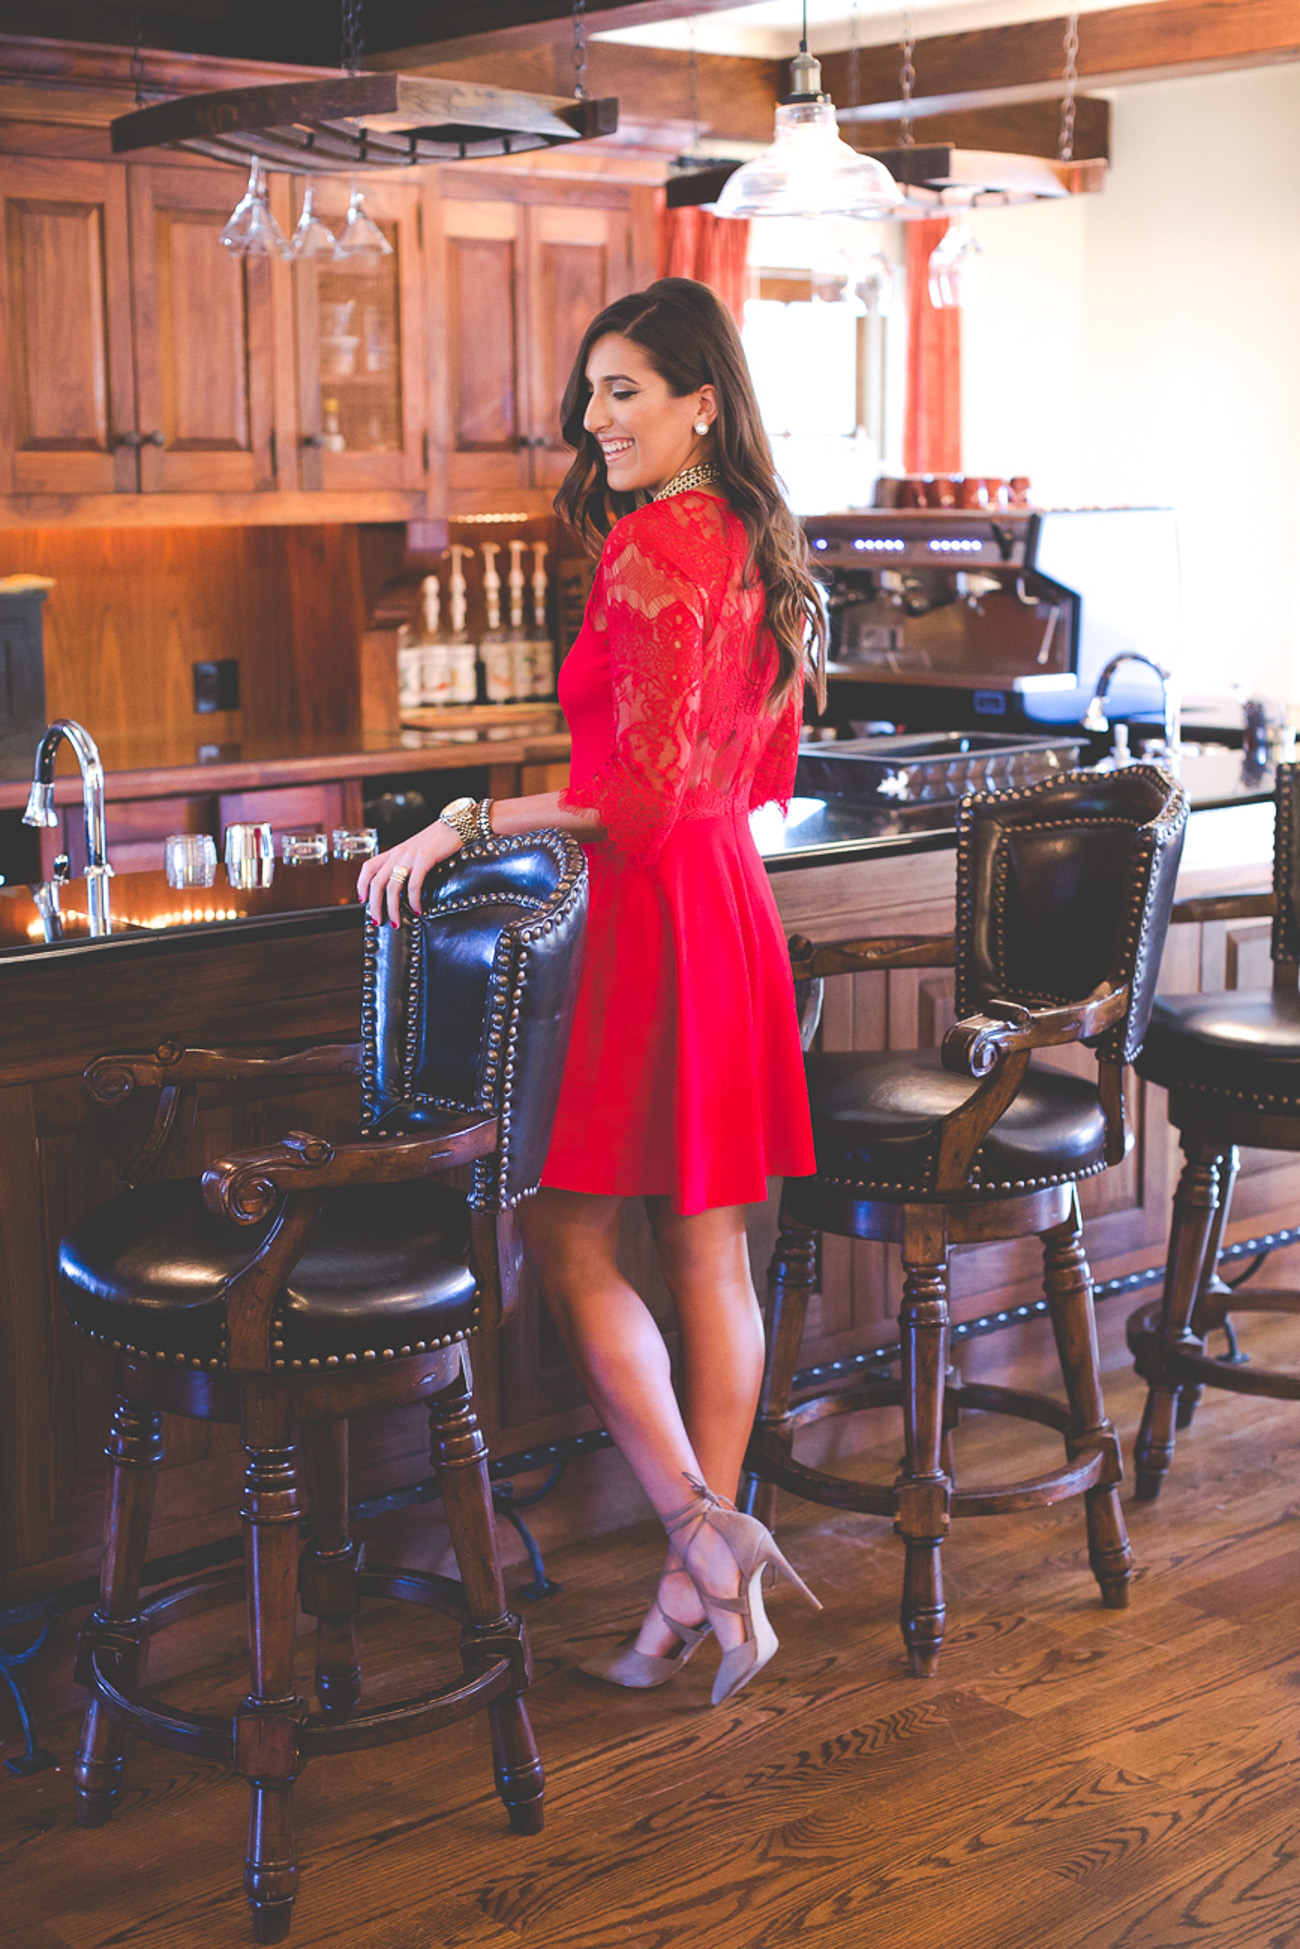 red lace dress outfit